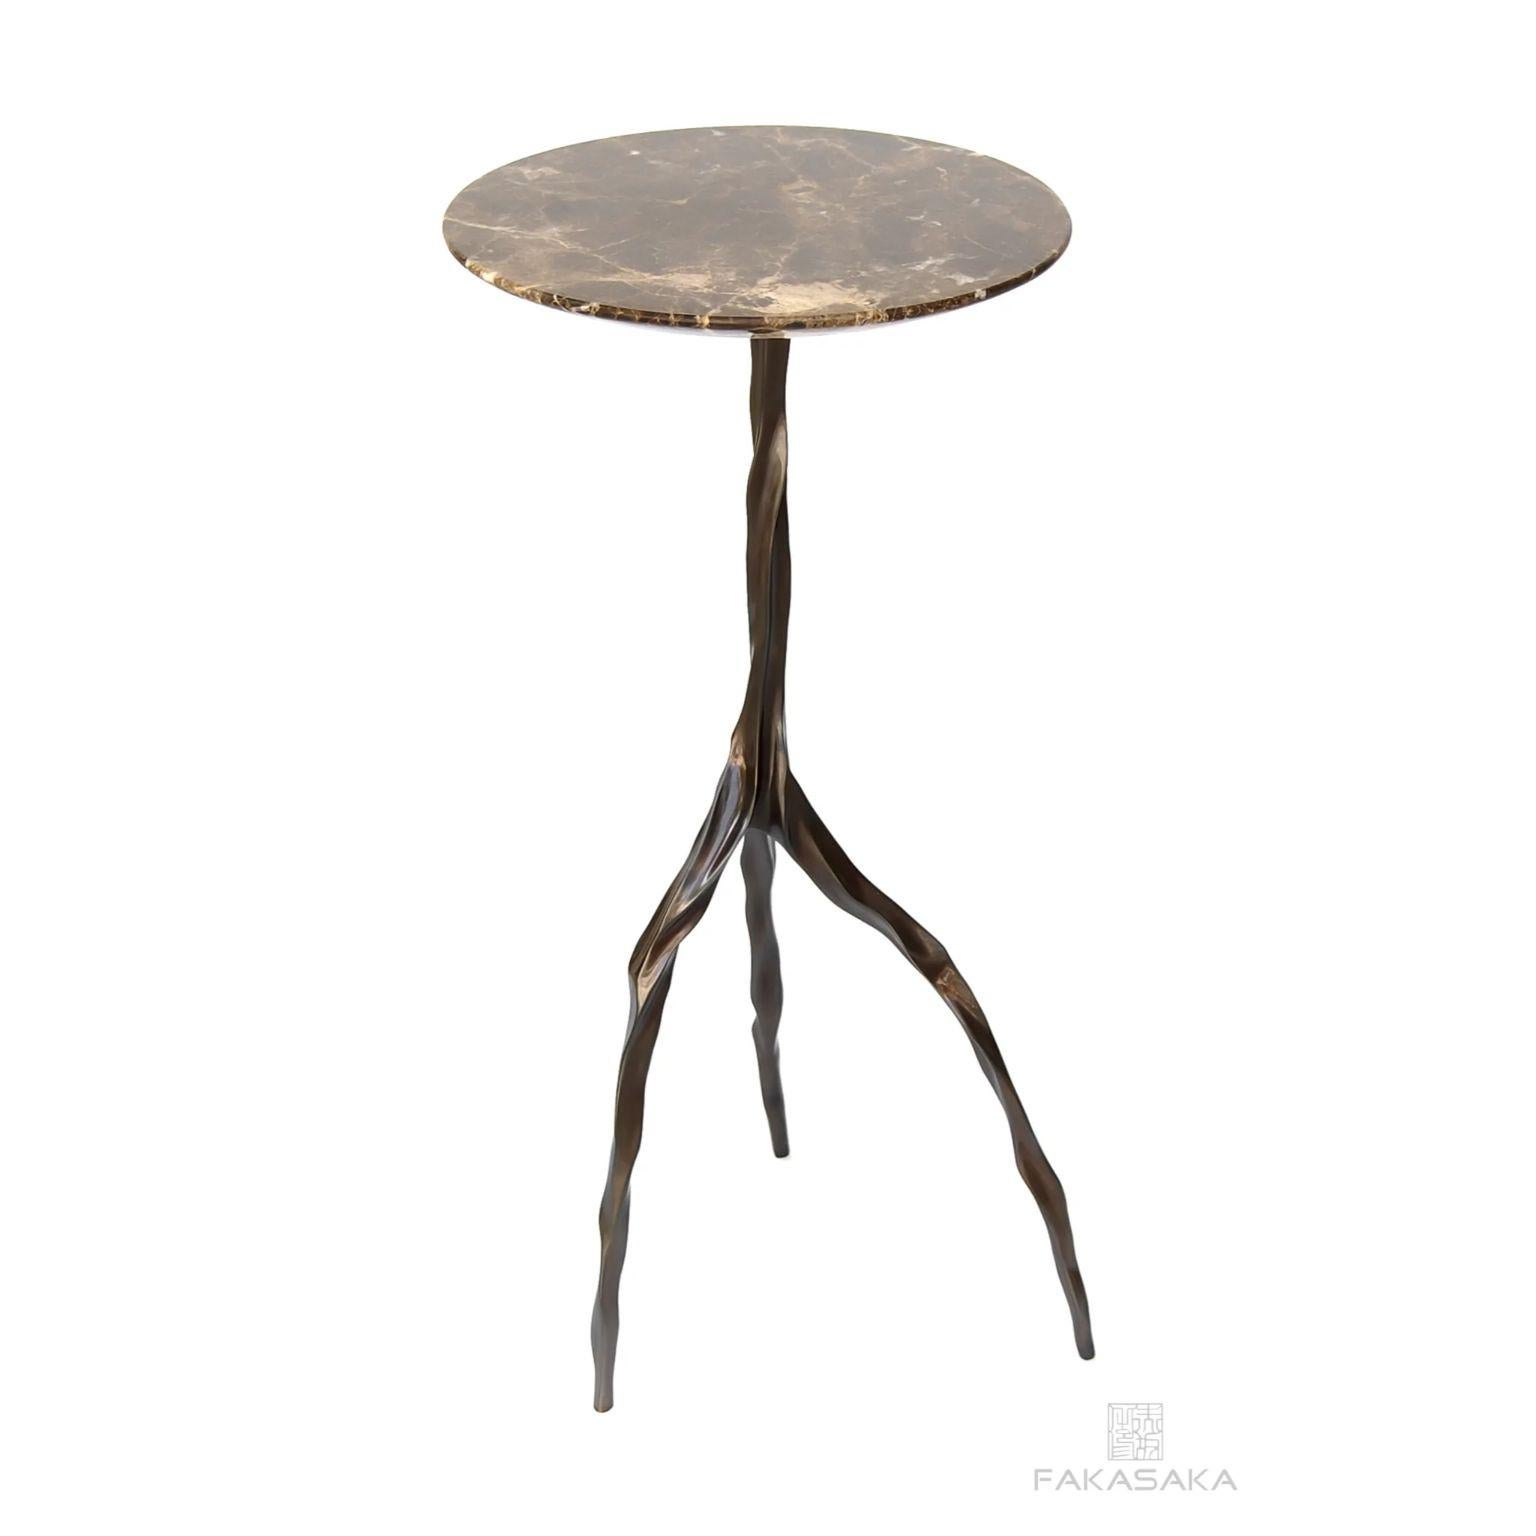 Modern Nina Drink Table with Marrom Imperial Marble Top by Fakasaka Design For Sale